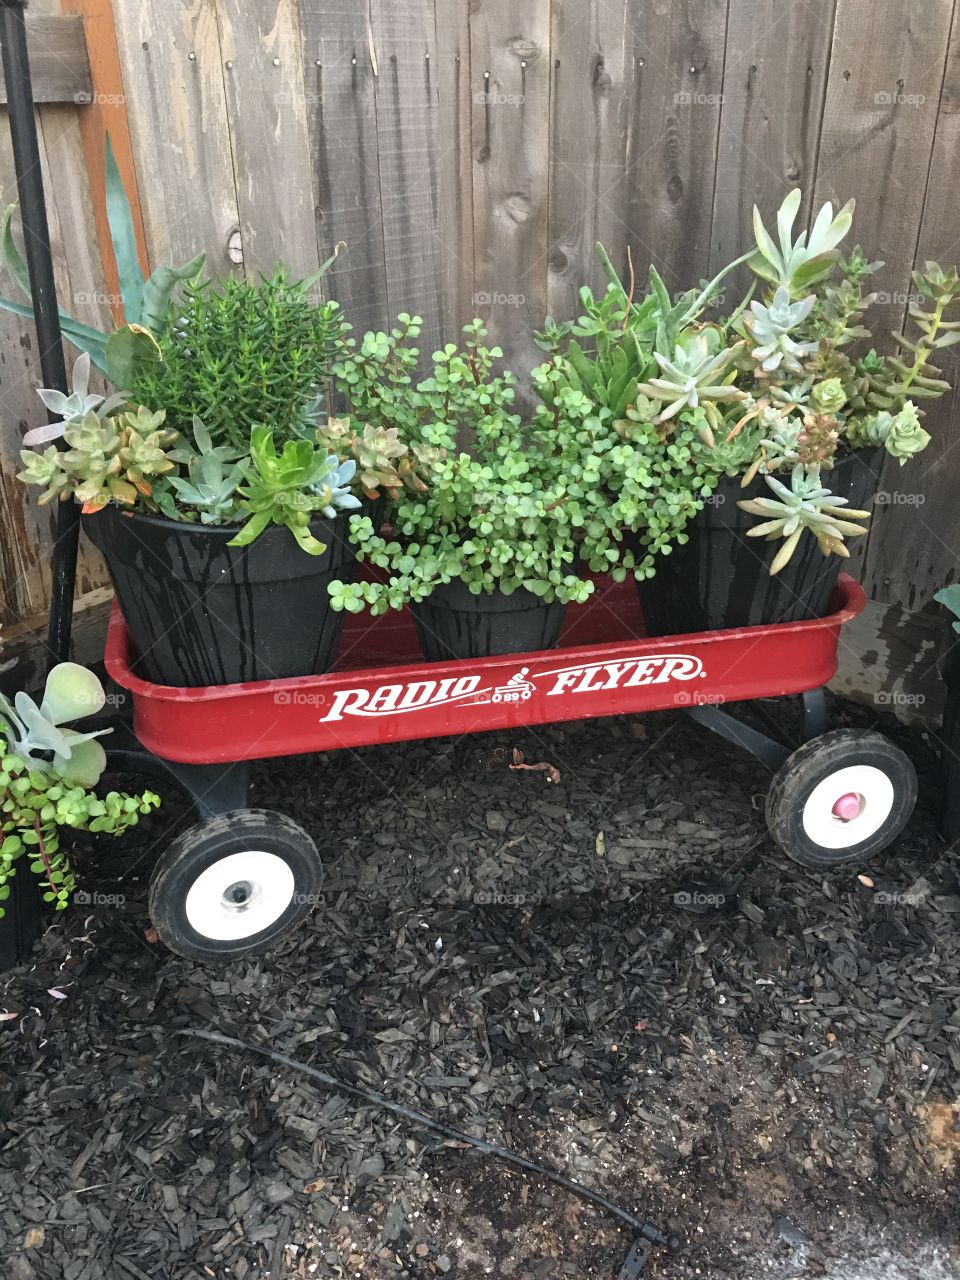 Succulents in a wagon

